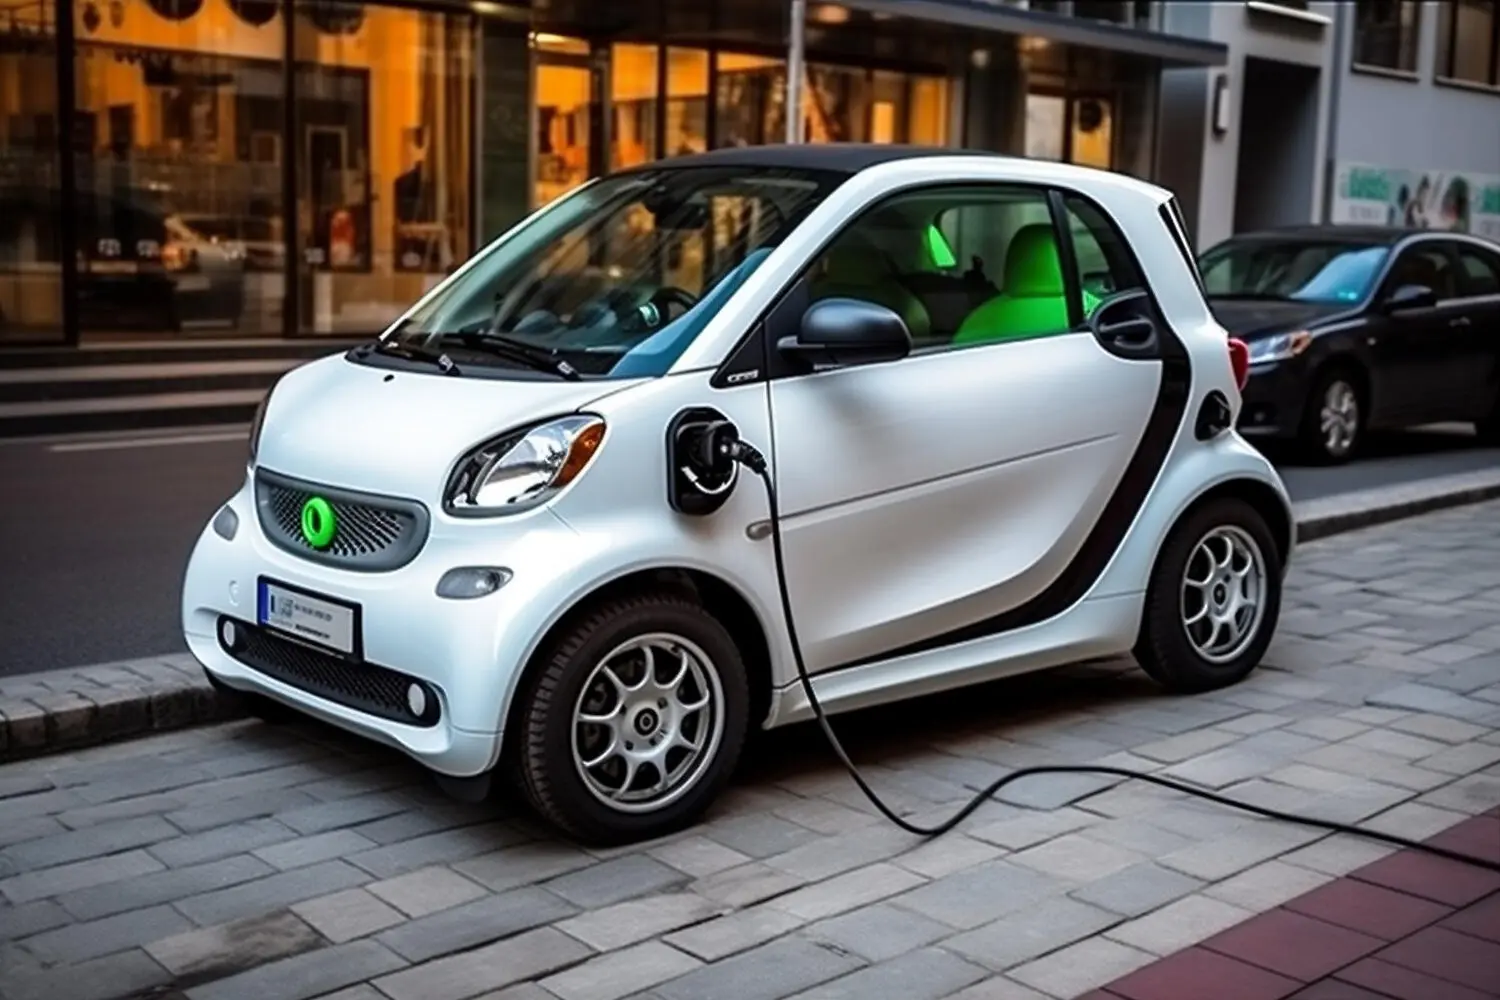 Small electric car that can be used by restaurants for deliveries